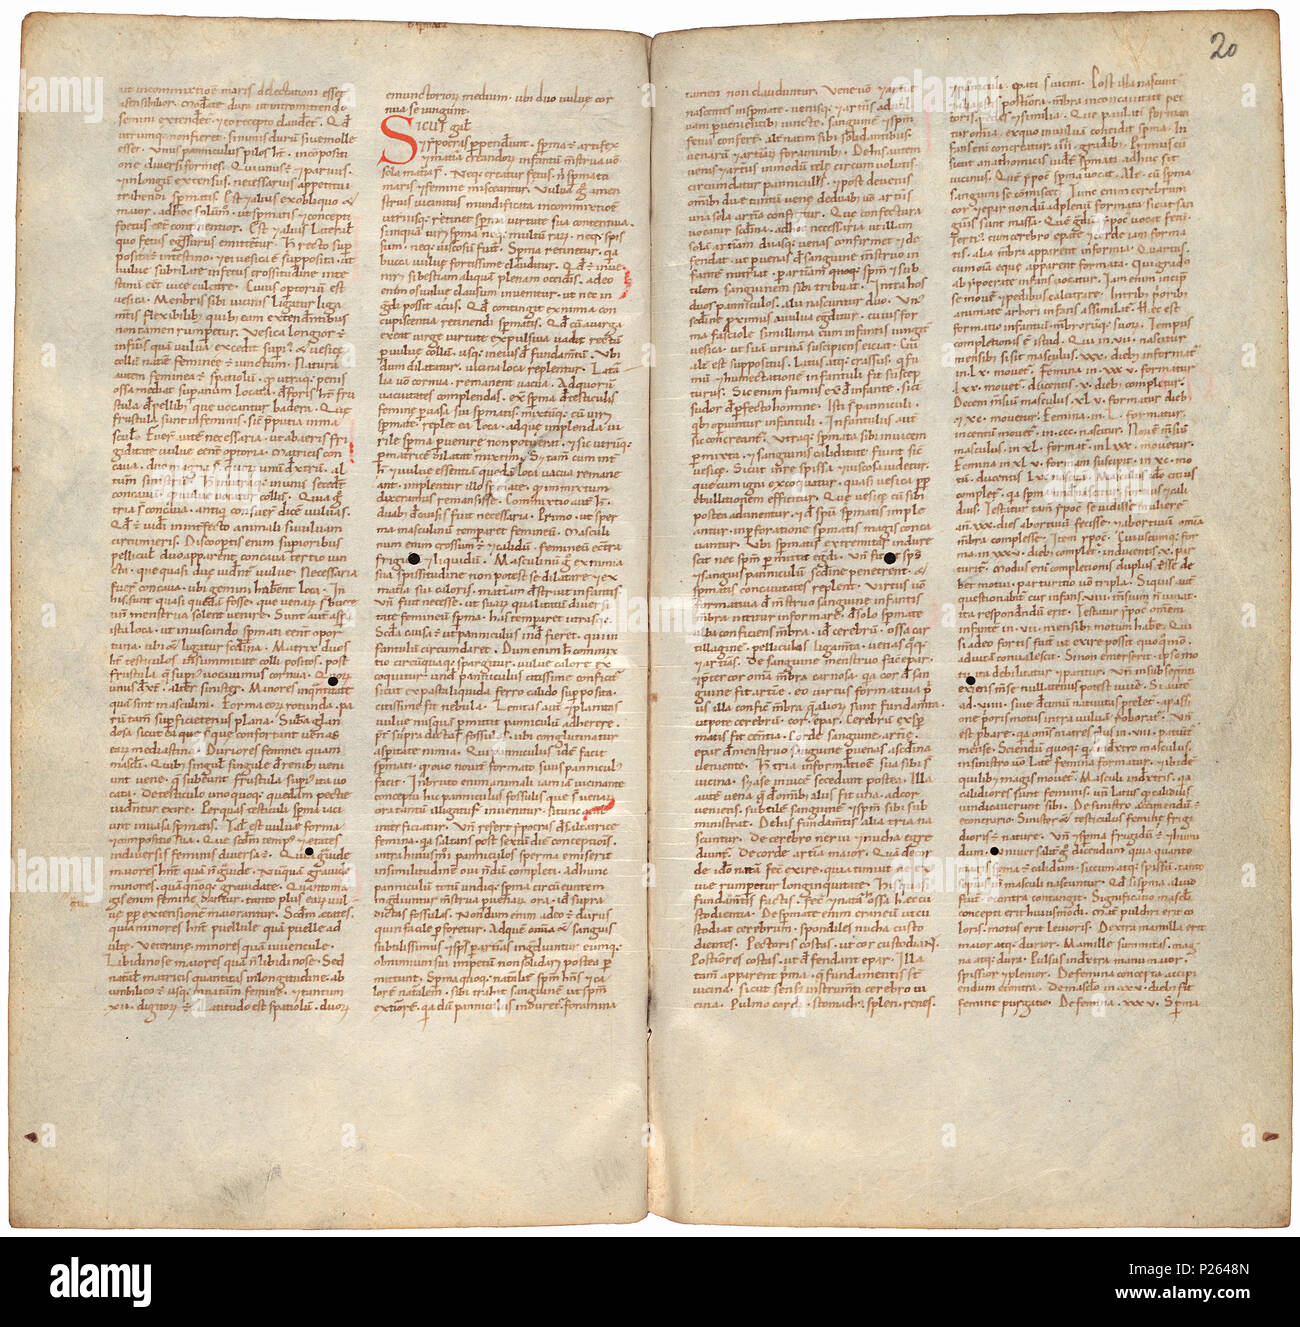 . Pantegni pars prima theorica (lib. I-X) - folios 019v (left) and 020r (right)  .  Lefthand side folio 019v; righthand side folio 020r from an 11th century copy of the Liber pantegni. This is the earliest known copy (prior to 1086) of the Liber pantegni, made at Monte Cassino under the supervision of Constantine the African. It is dedicated to Abbot Desiderius of Monte Cassino (1027-1087), before he became Pope Victor III. Read backgroud information in Dutch and in English. . Constantine the African (ca. 1010-1098/9) 175 Liber pantegni - KB 73 J 6 - folios 019v (left) and 020r (right) Stock Photo